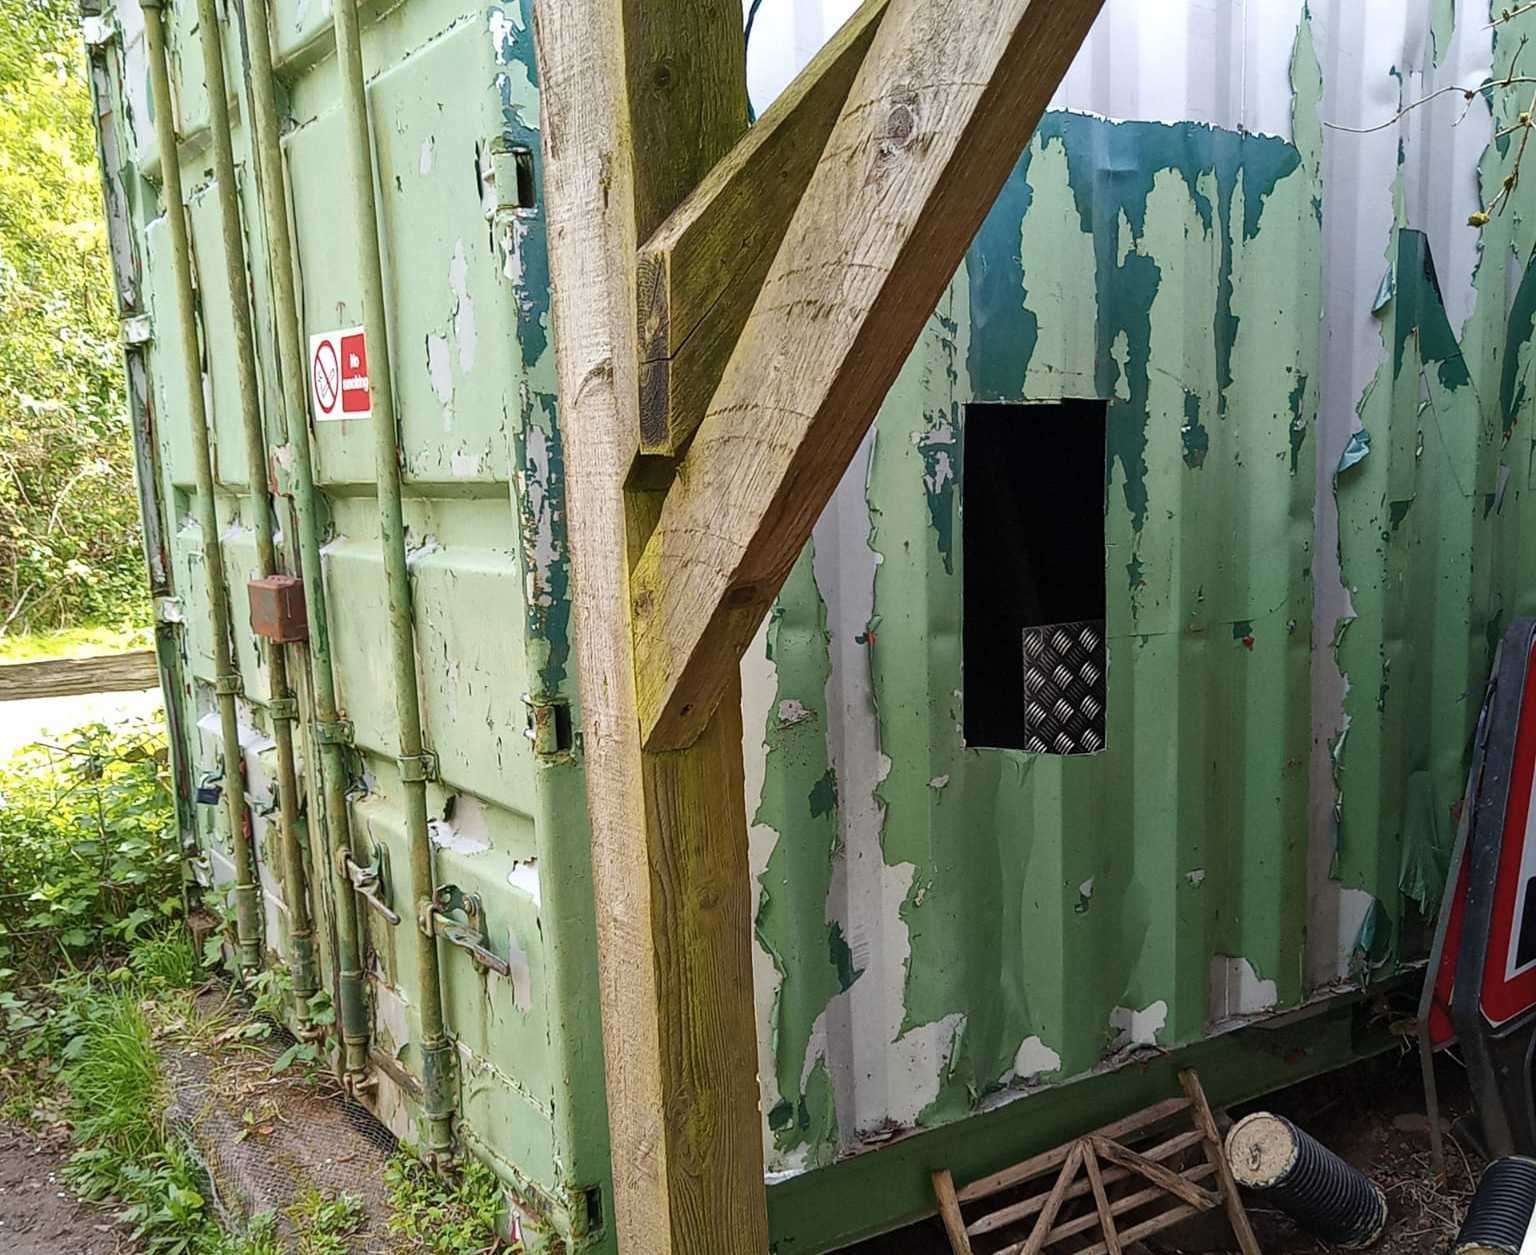 Two shipping containers were damaged during the break in. Picture: Kent Wildlife Trust